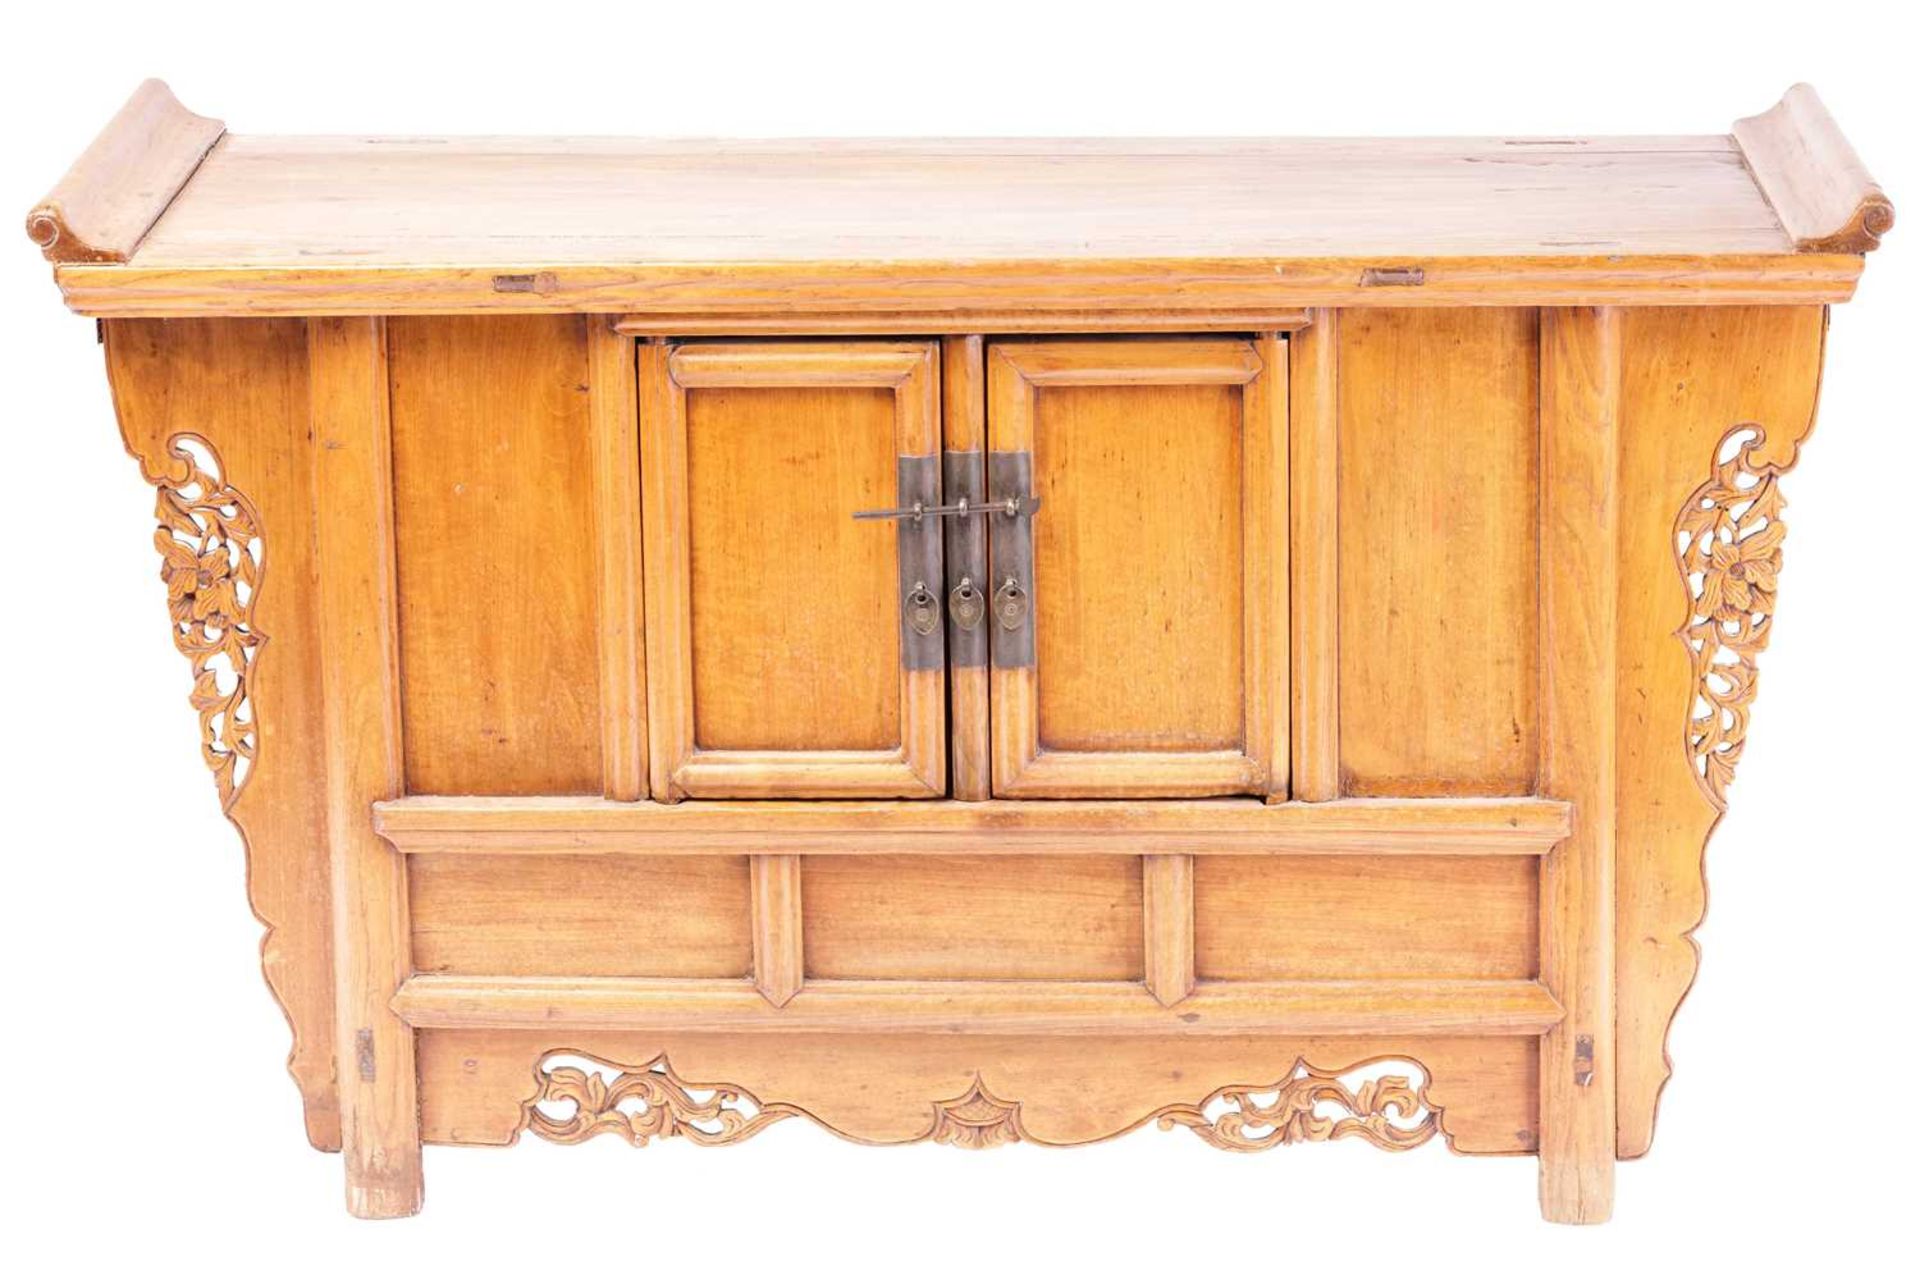 A Northern Chinese yumu altar cabinet, second half of the 20th century, with a slightly everted